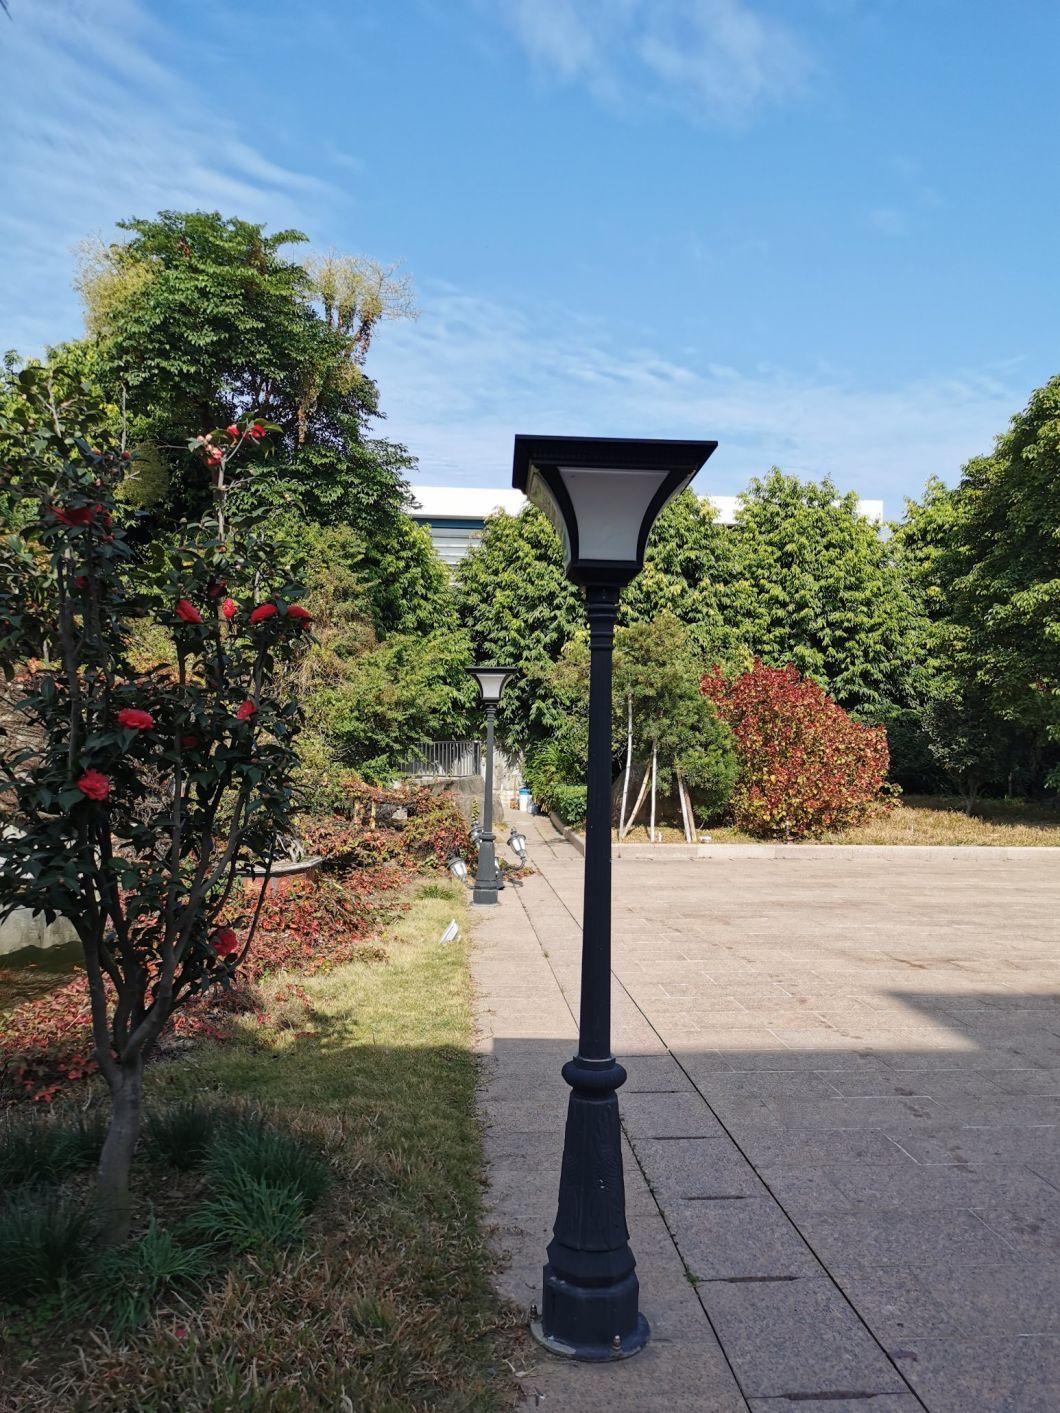 IP66 Yard Walkway Path Garden Lamp 160lm 50W All in One Solar Light LED Lamp Lights Lighting Decoration Energy Saving Power System Home Products Street